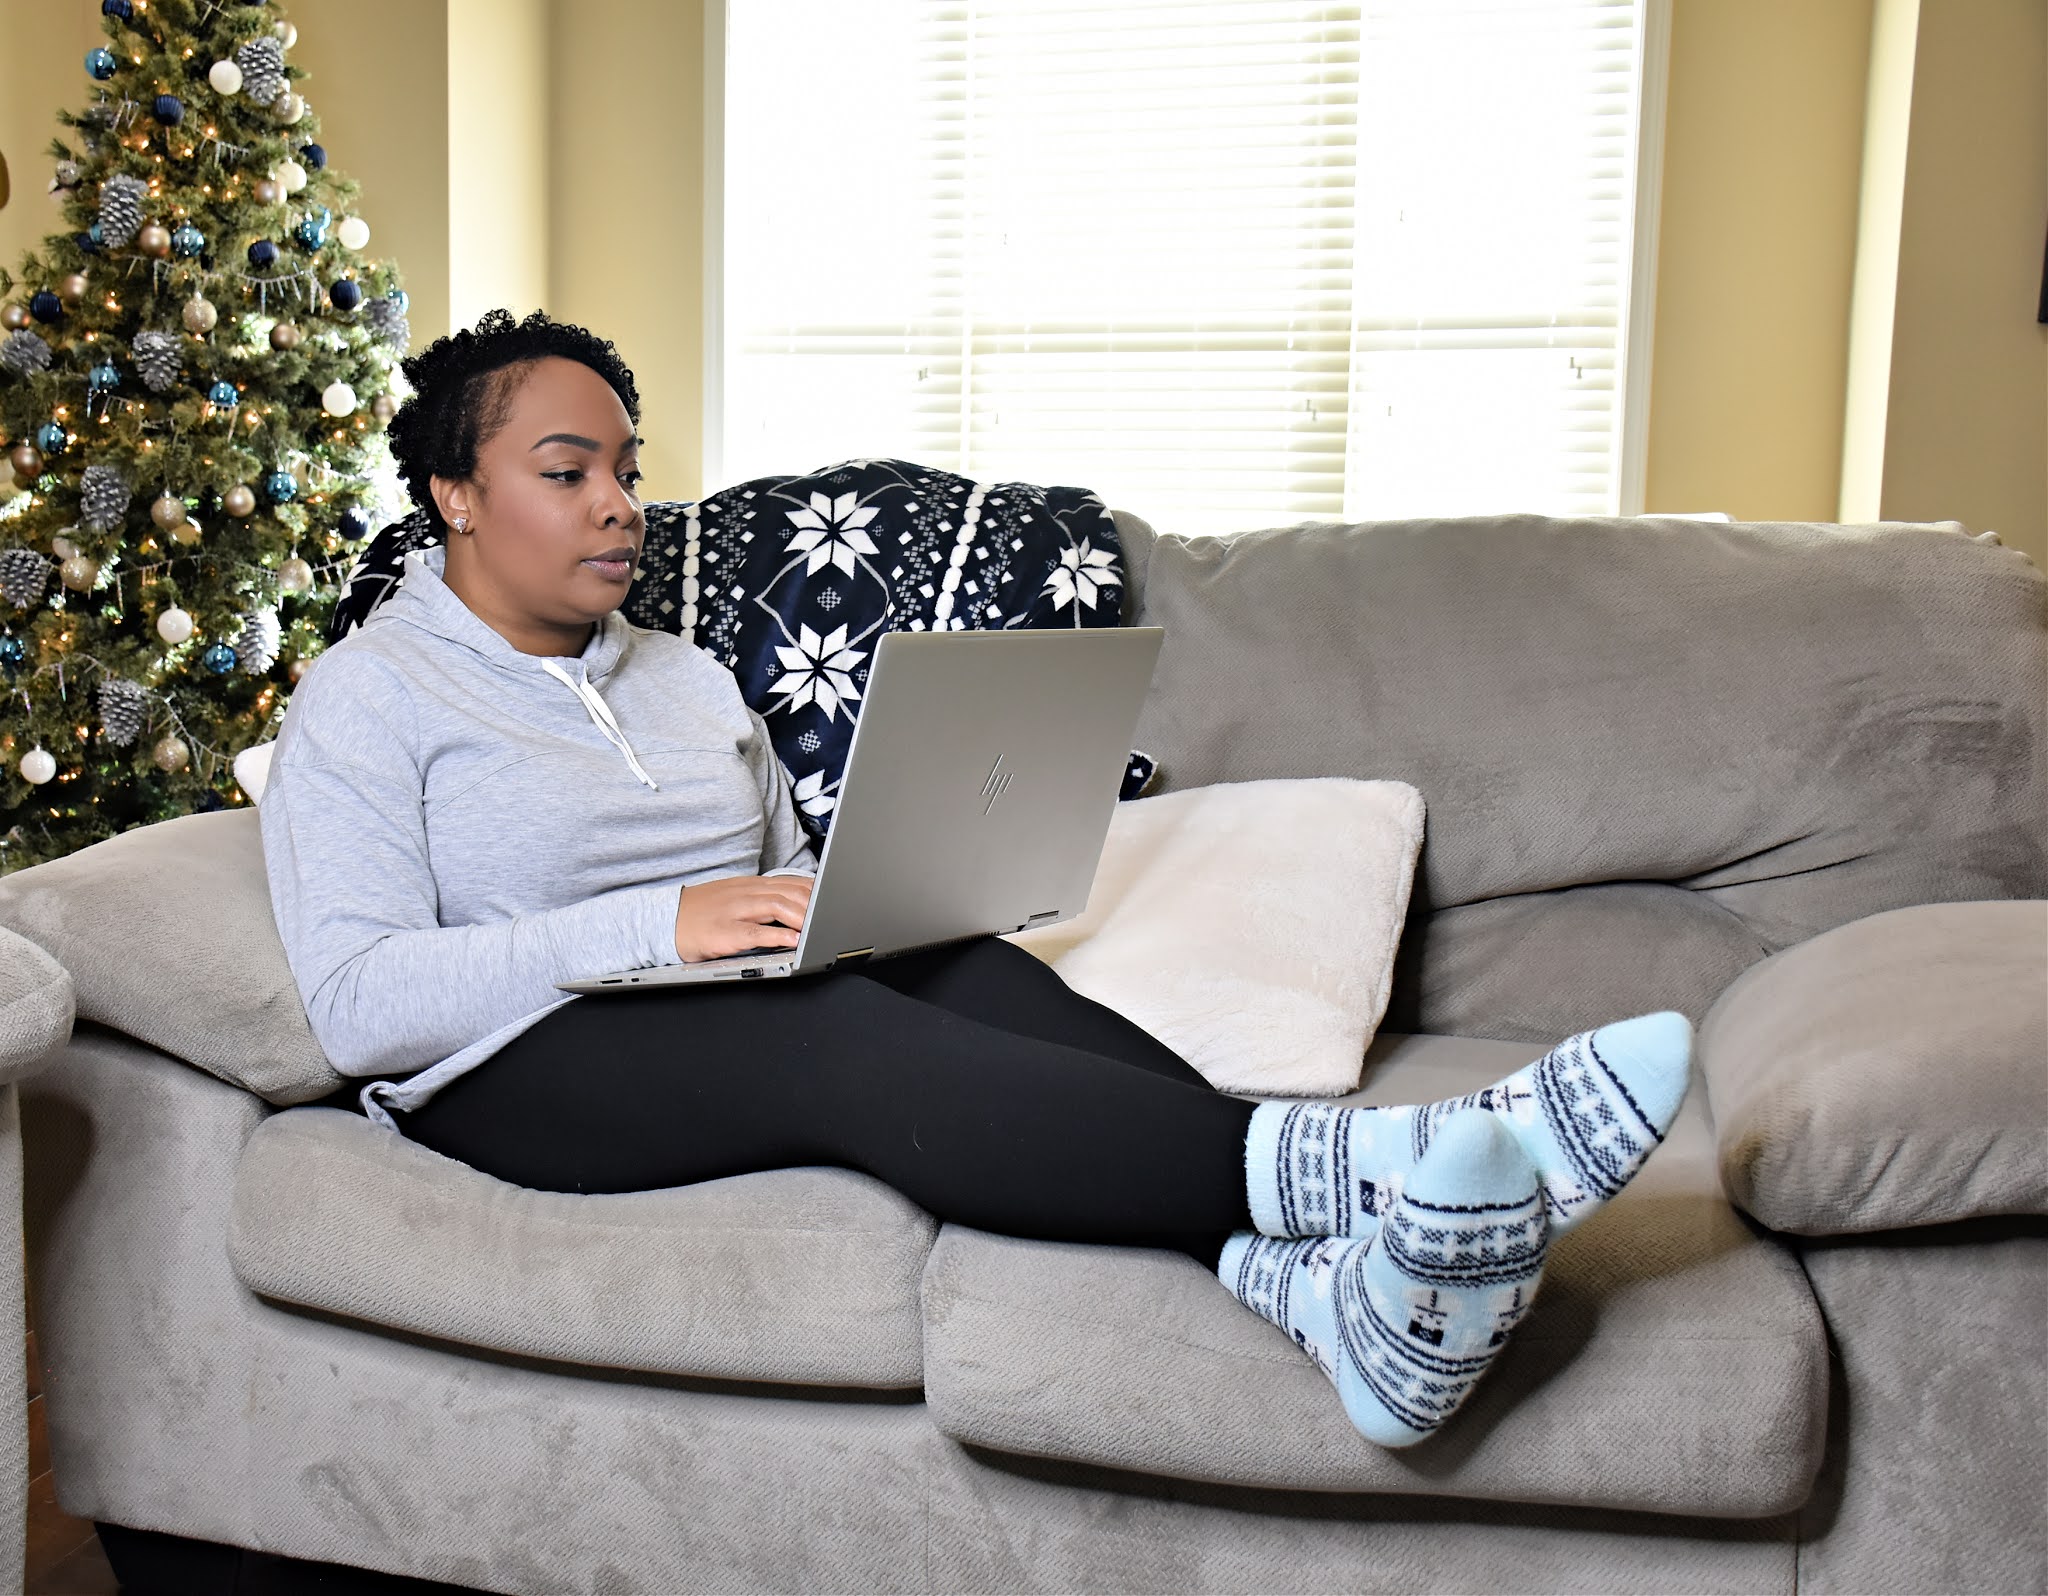 Cozy on a couch online shopping during Christmas